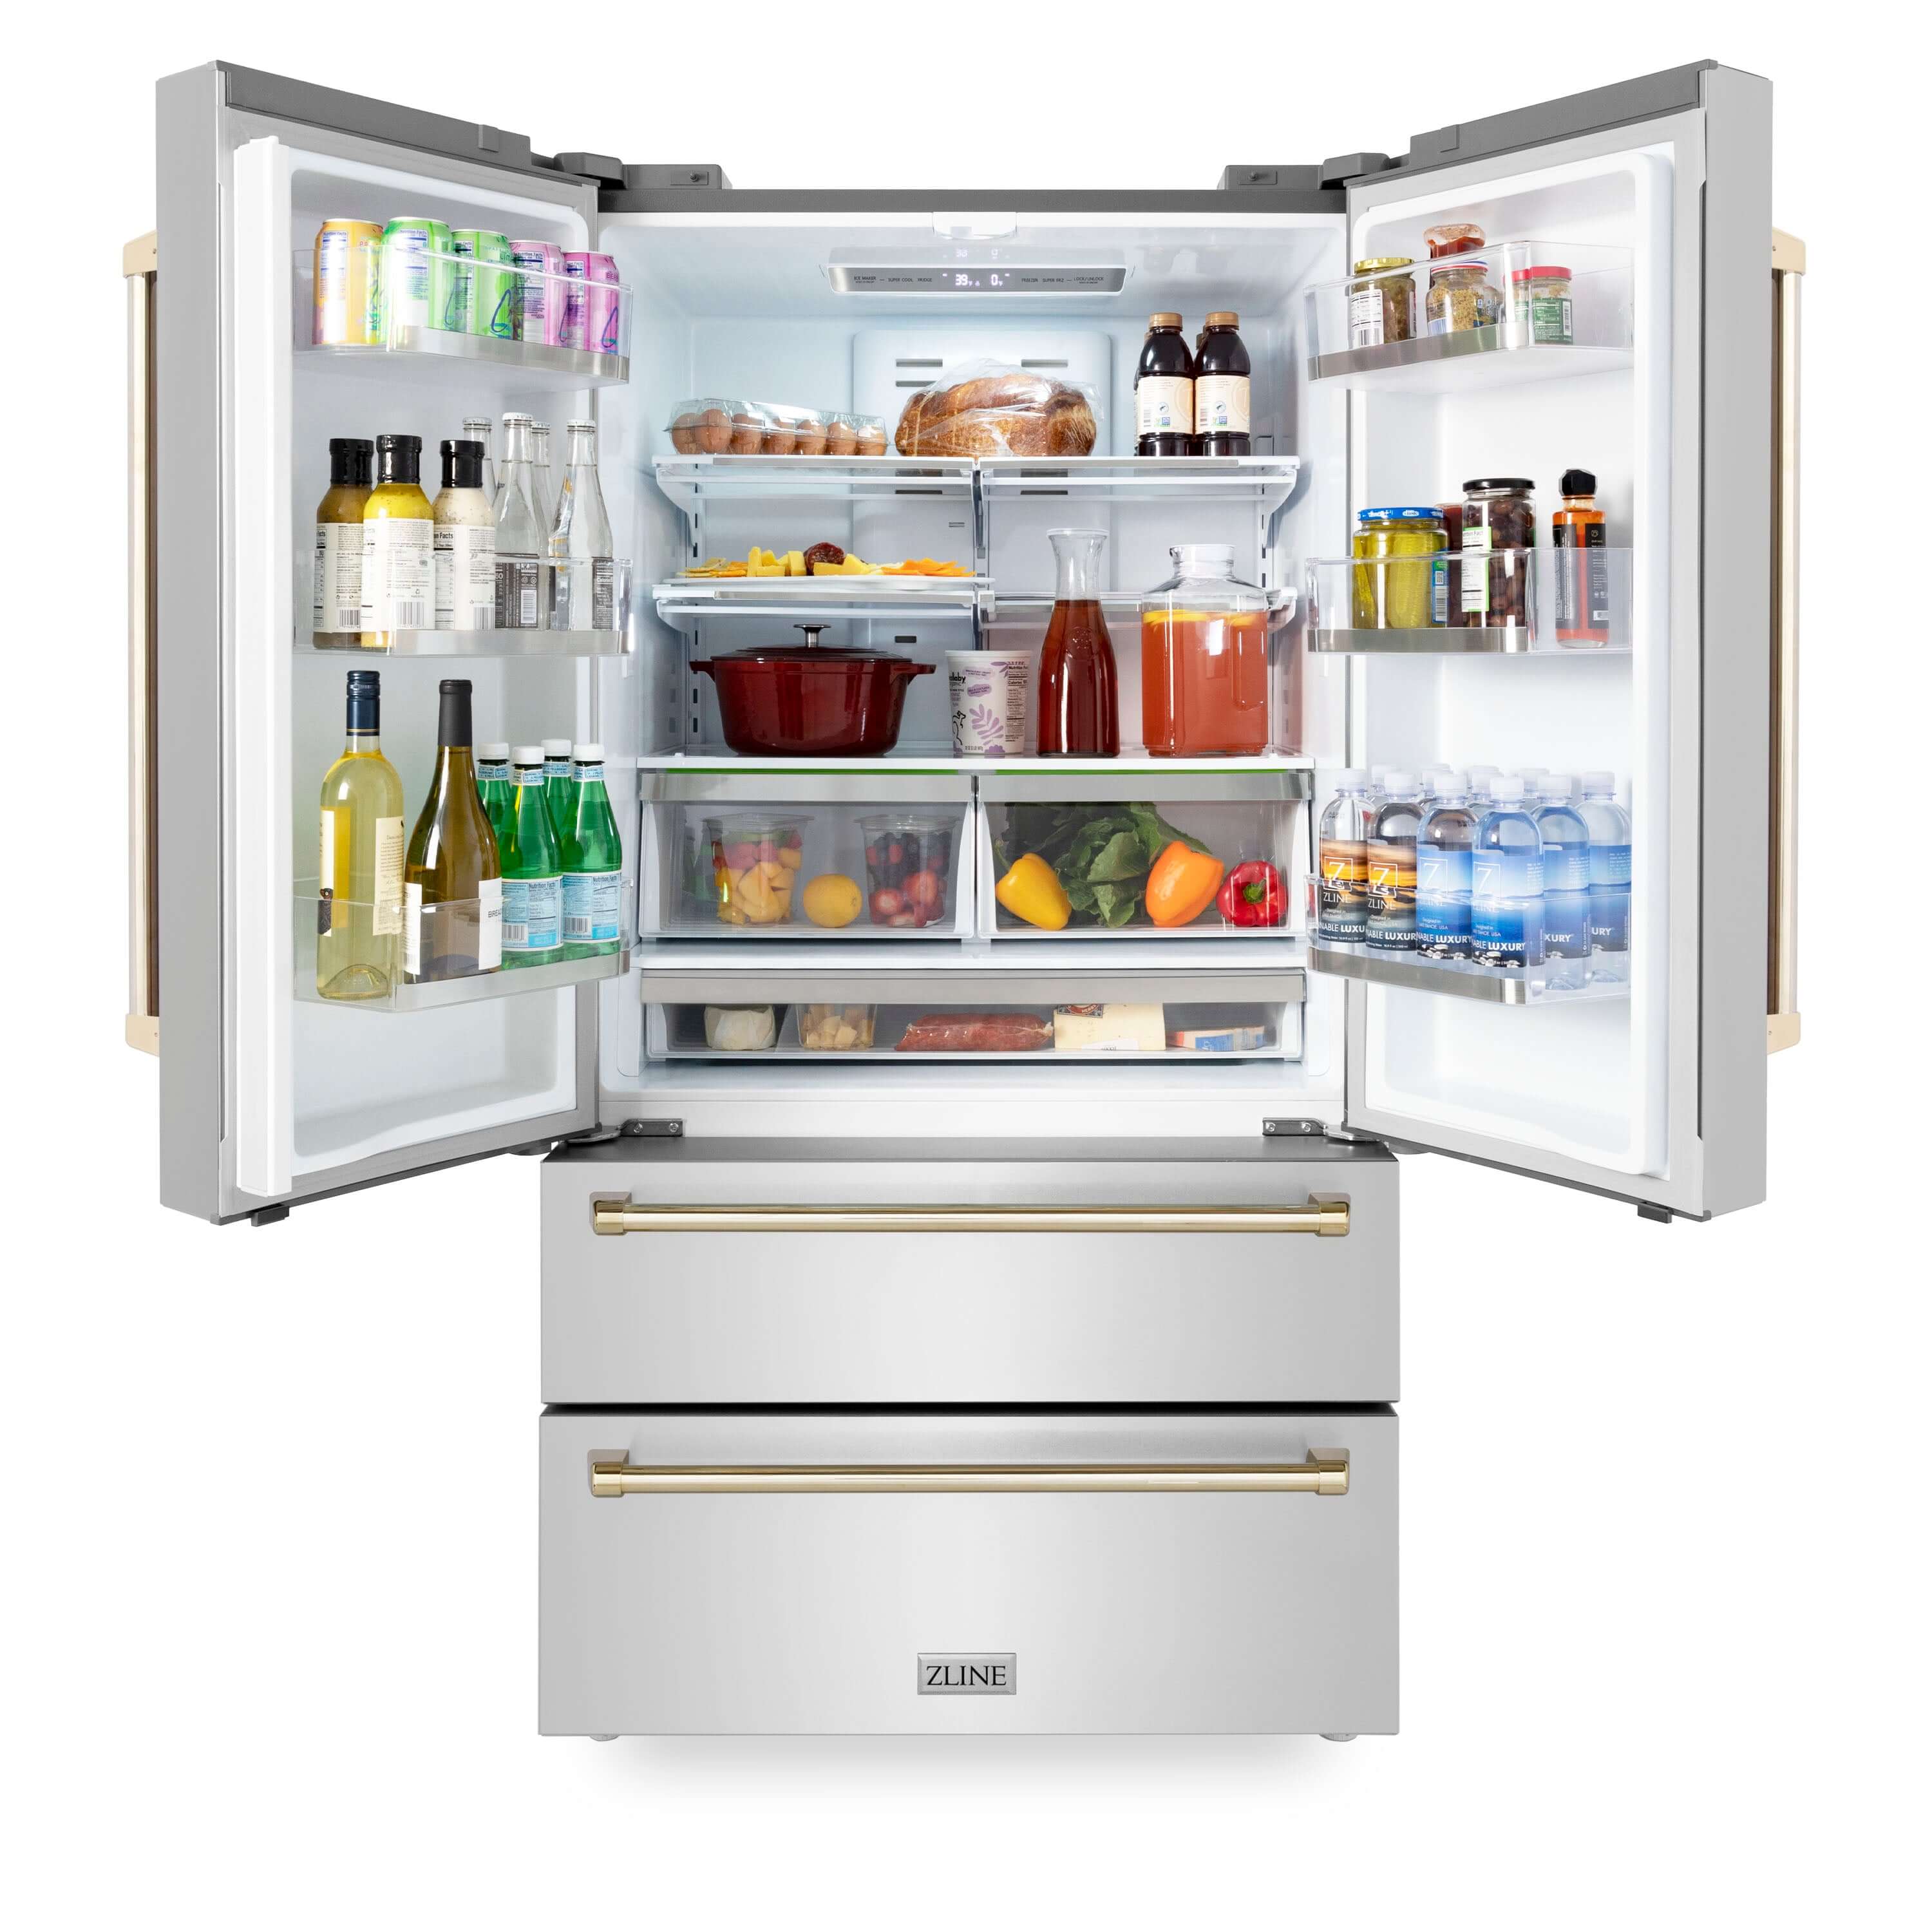 ZLINE Autograph Edition 36 in. French Door Refrigerator in Stainless Steel with Polished Gold Accents (RFMZ-36-G) front, doors open with food inside.